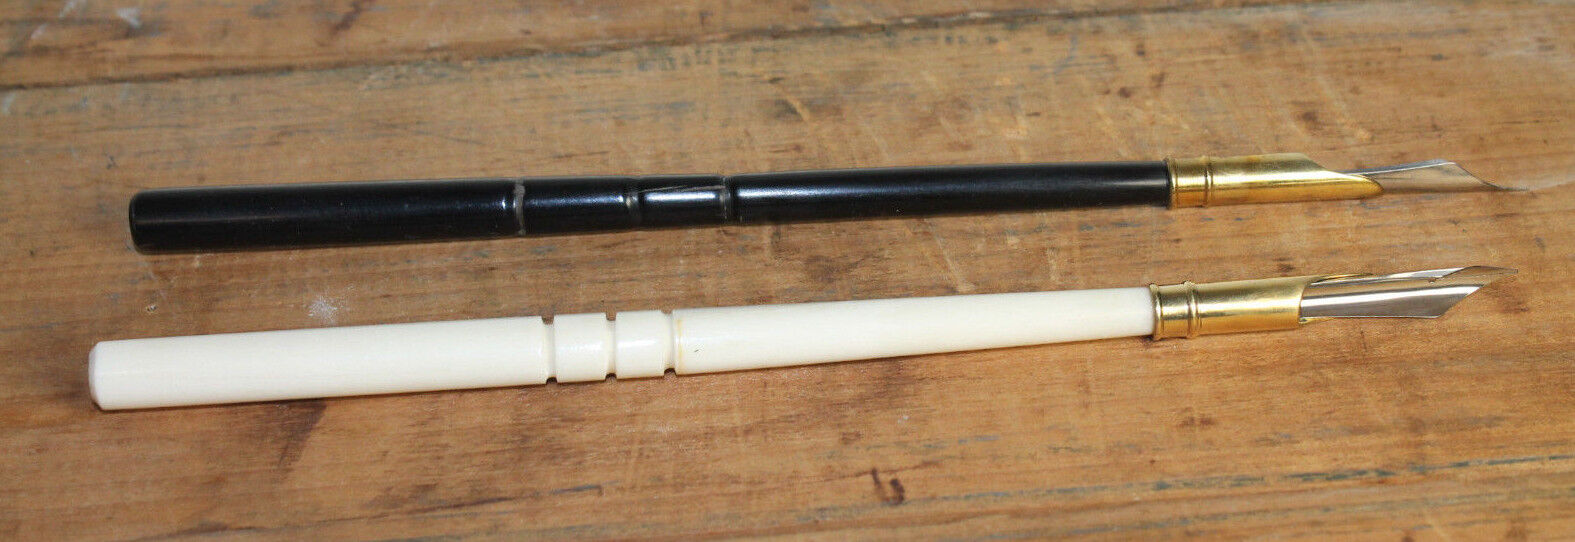 2 Antique Style Turned Bone & Horn Calligraphy Fountain Dip Ink Nib Writing Pen